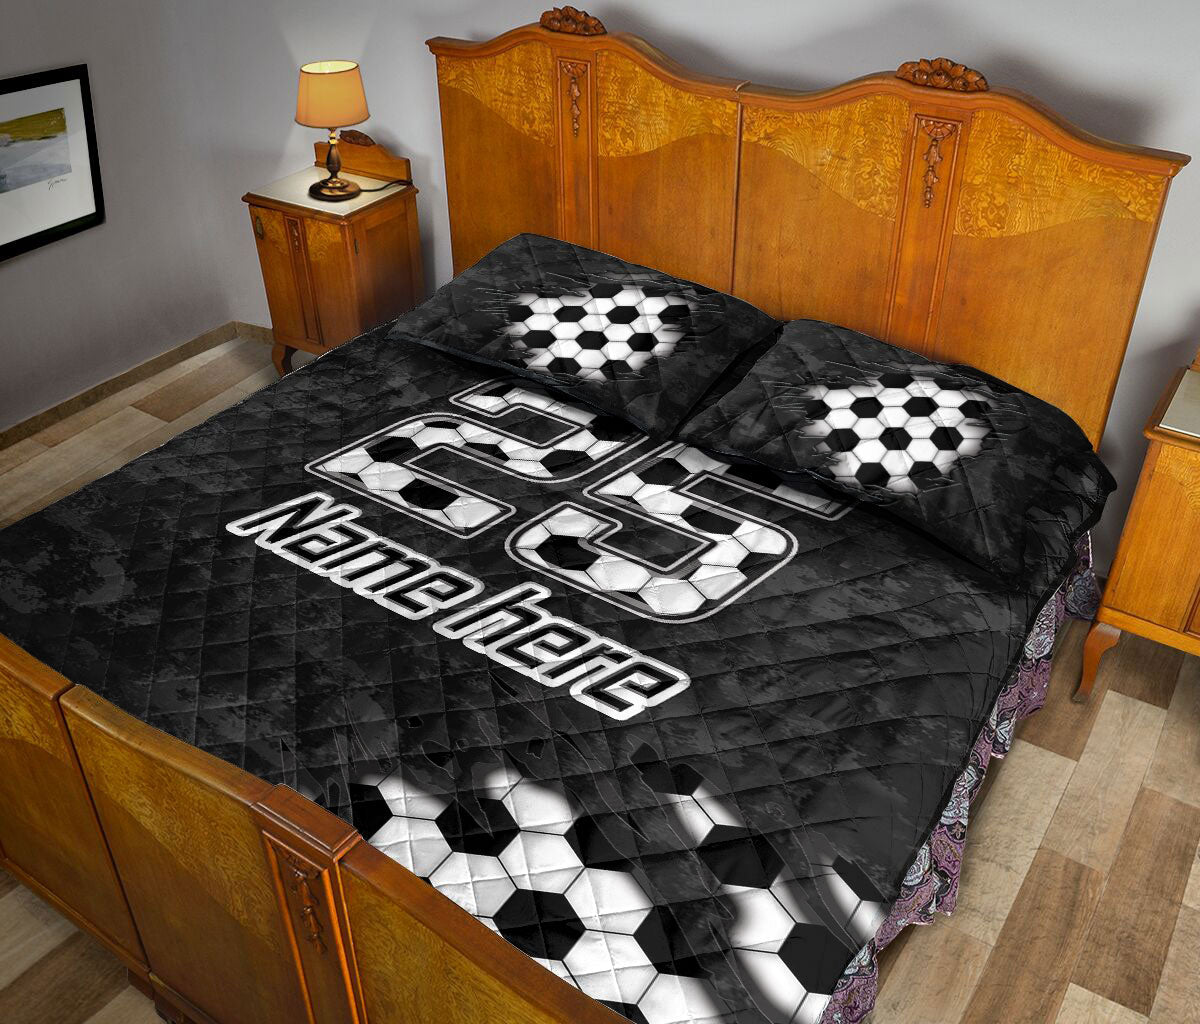 Ohaprints-Quilt-Bed-Set-Pillowcase-Soccer-Sport-B&W-Ball-Pattern-Black-Camo-Custom-Personalized-Name-Number-Blanket-Bedspread-Bedding-919-Queen (80'' x 90'')